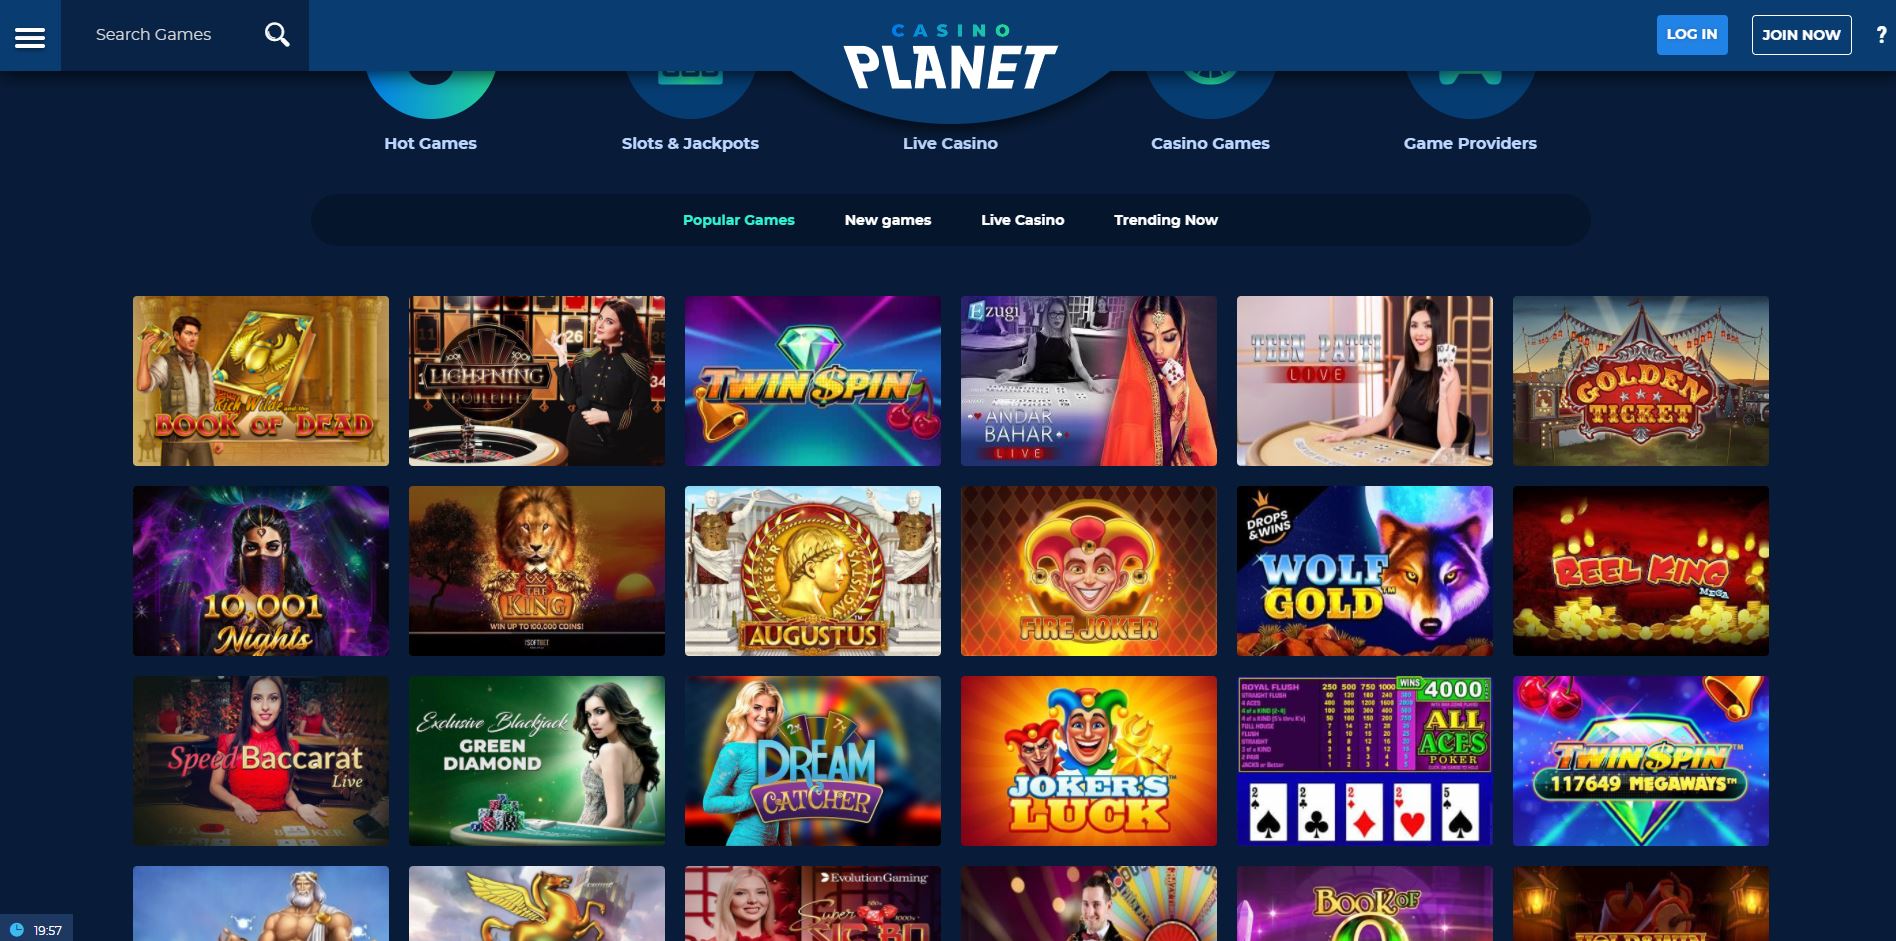 Casino Planet India Review